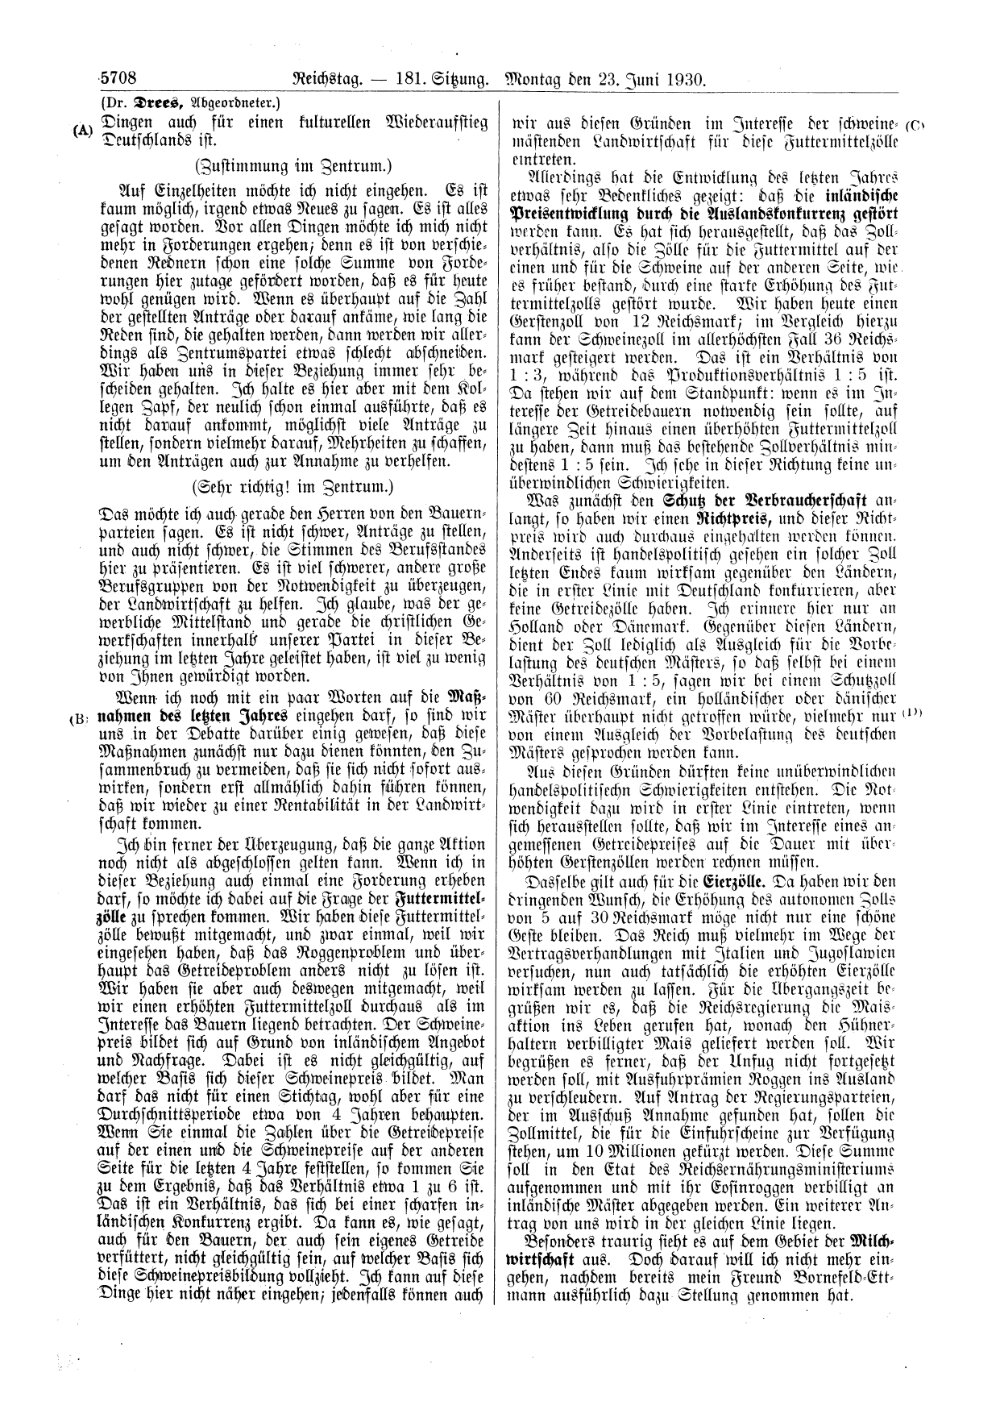 Scan of page 5708